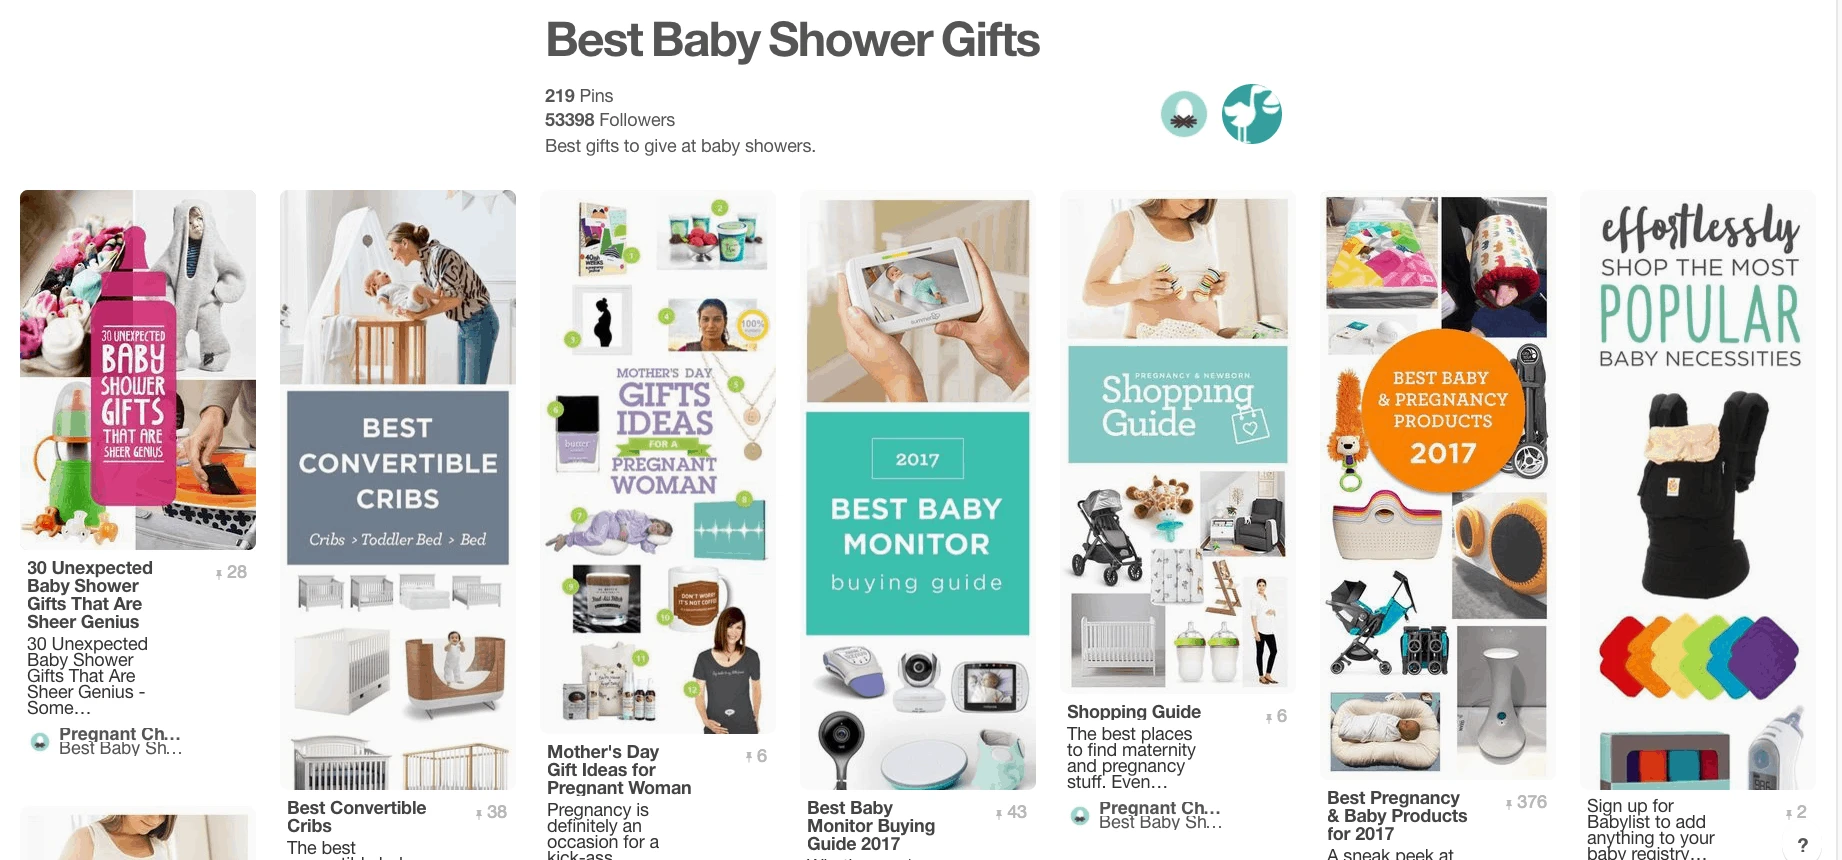 Collage of baby shower gift ideas.